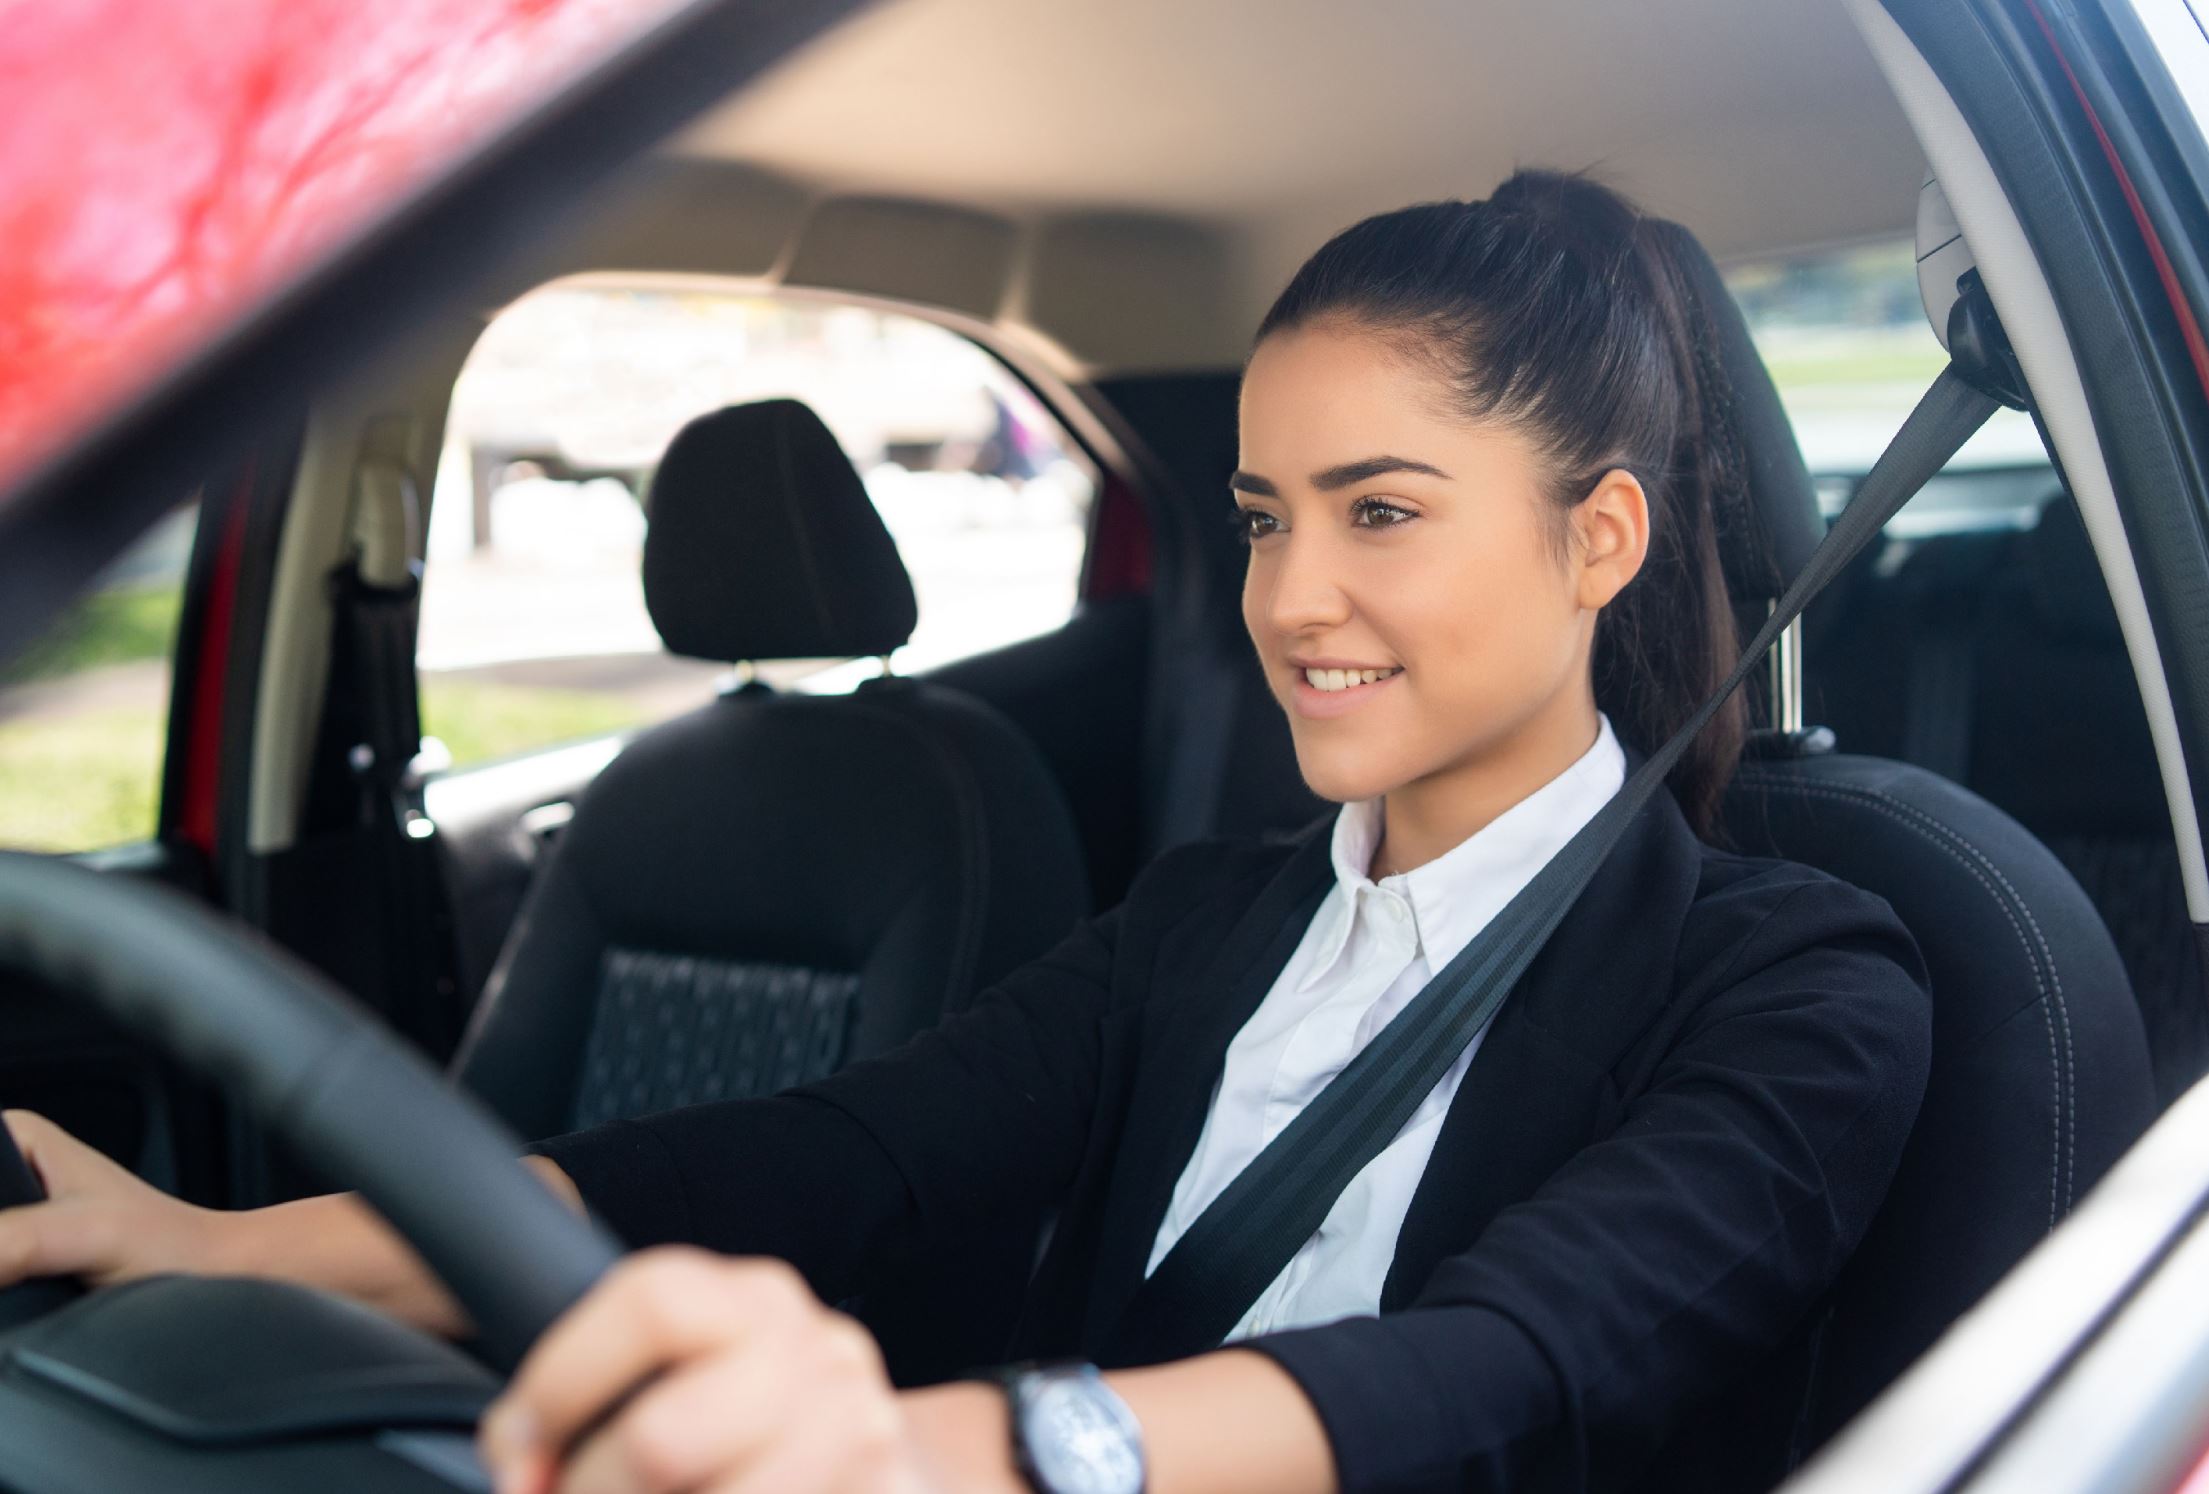 Fact! Women Are The Safest Drivers – Pink Car Leasing Study Confirms